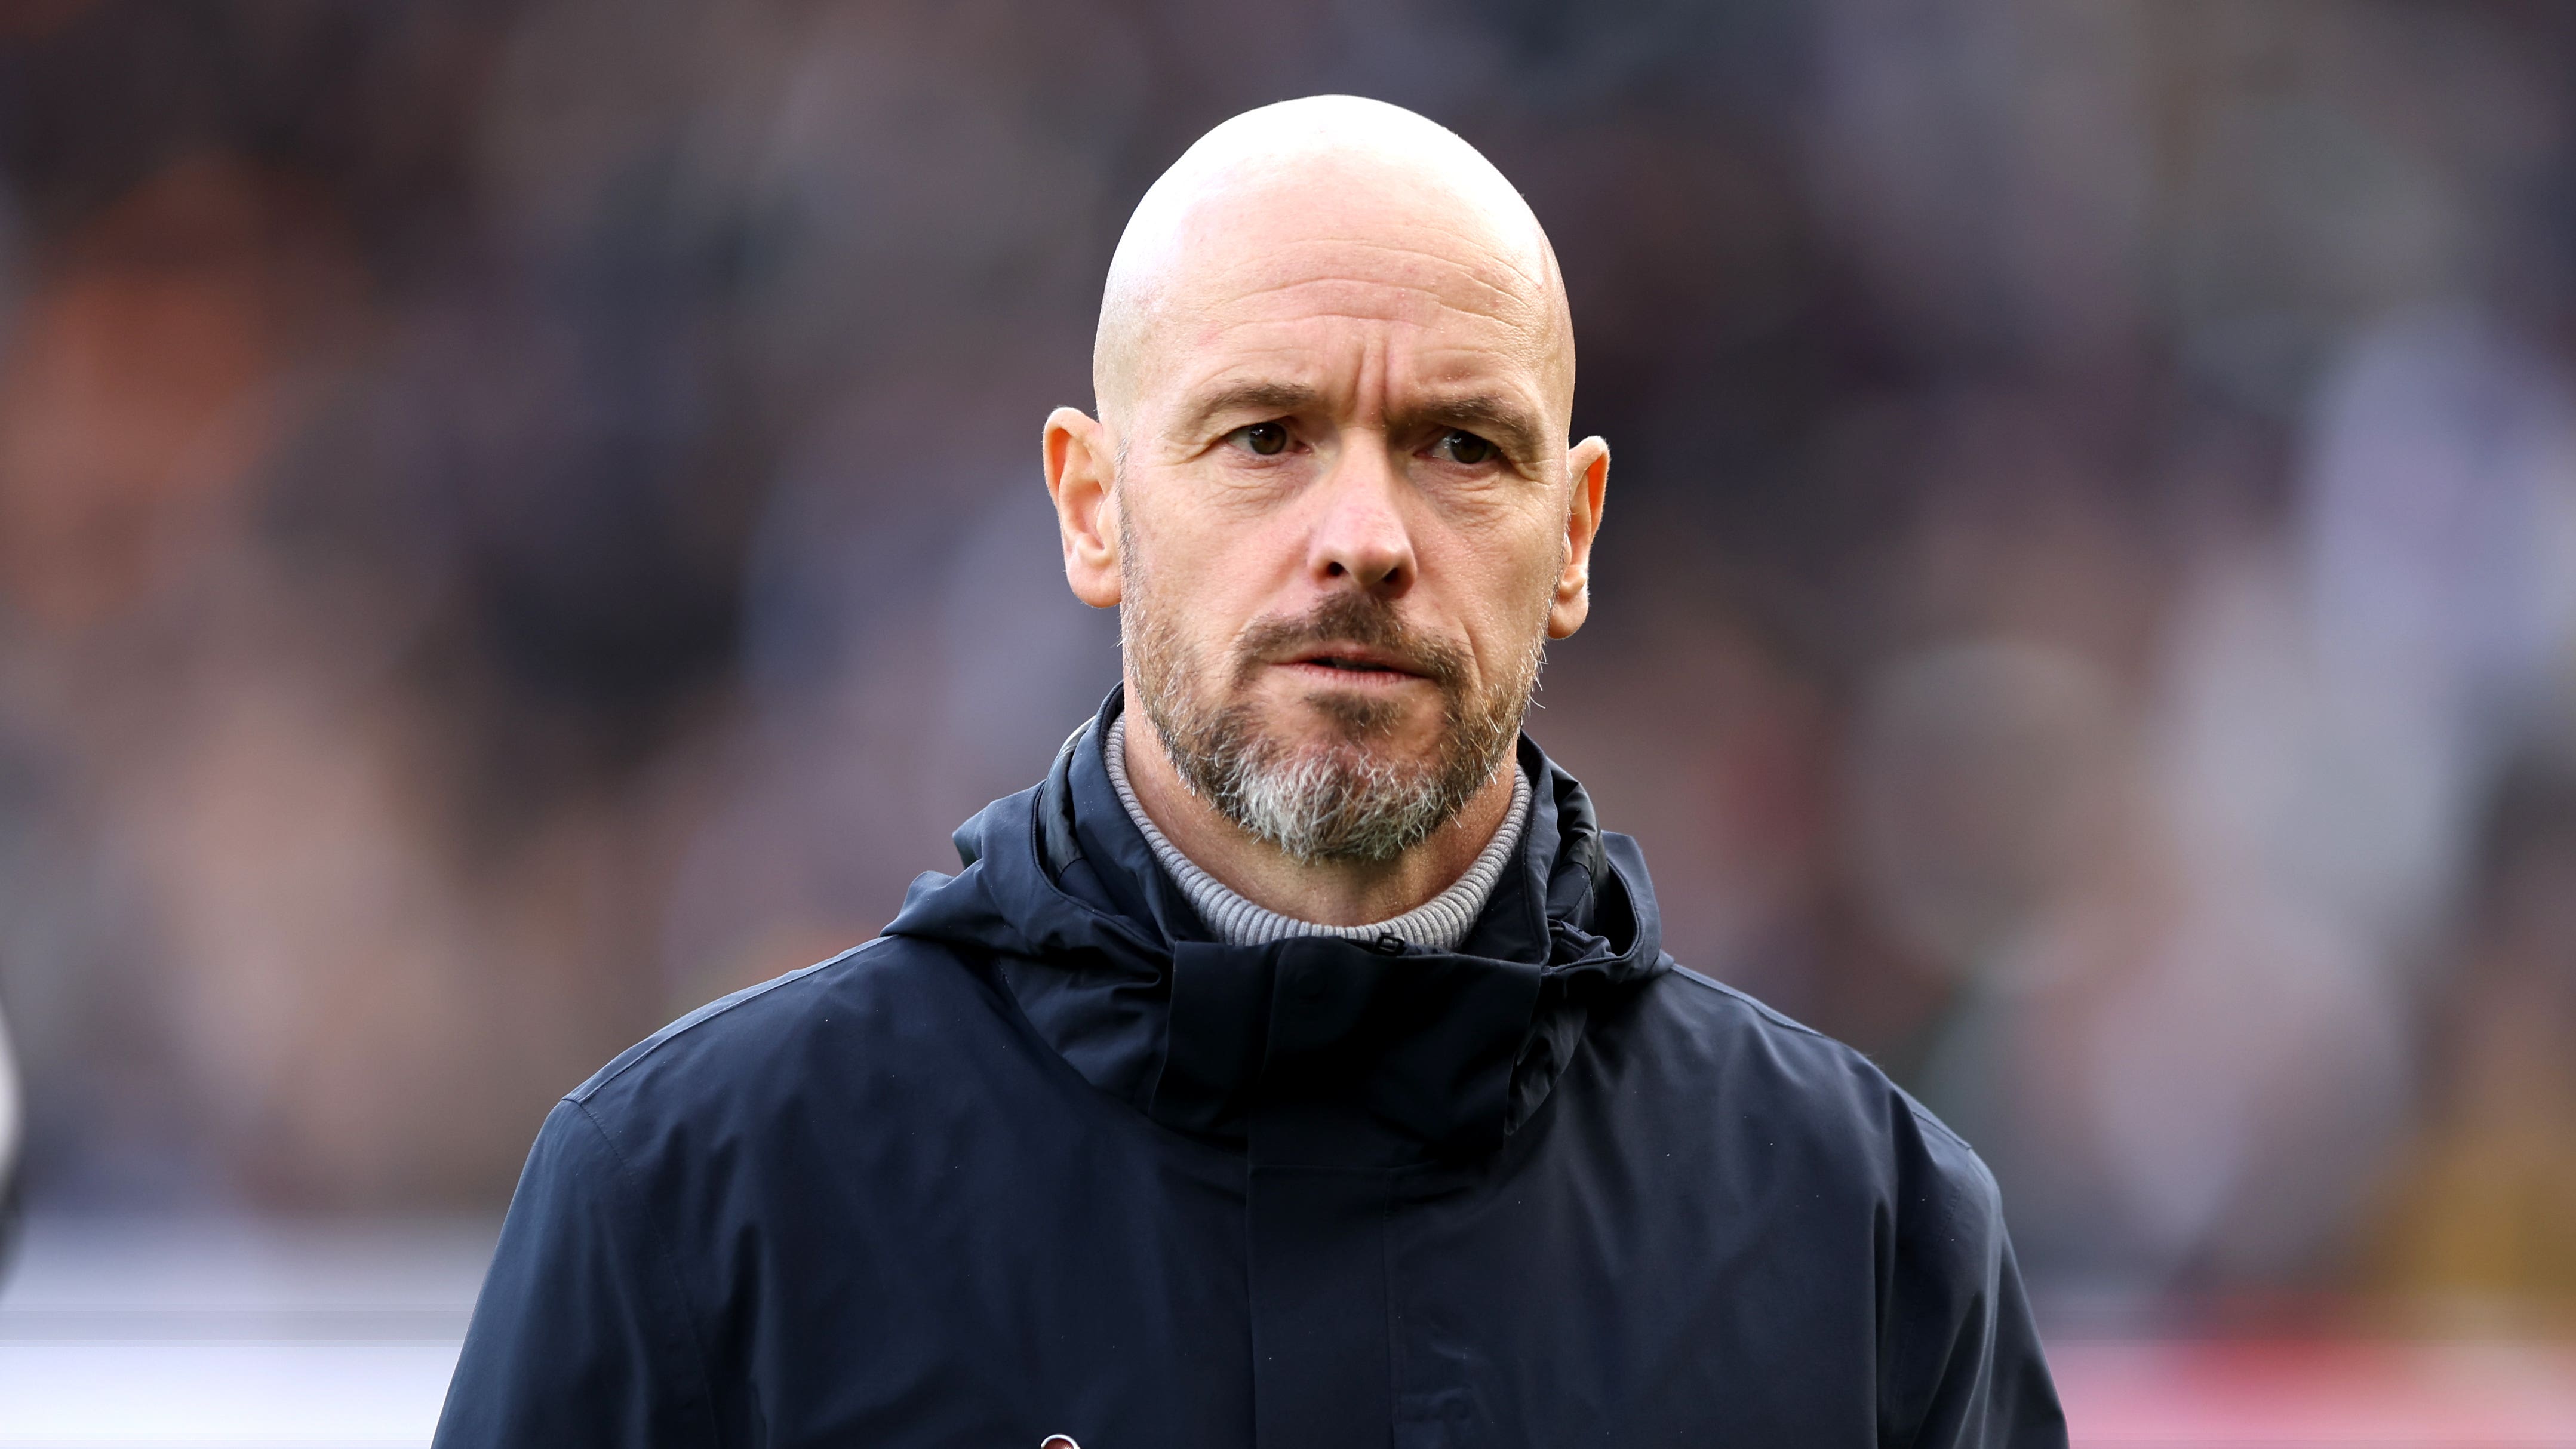 Erik ten Hag: Schedule has already crossed limits of what players can handle